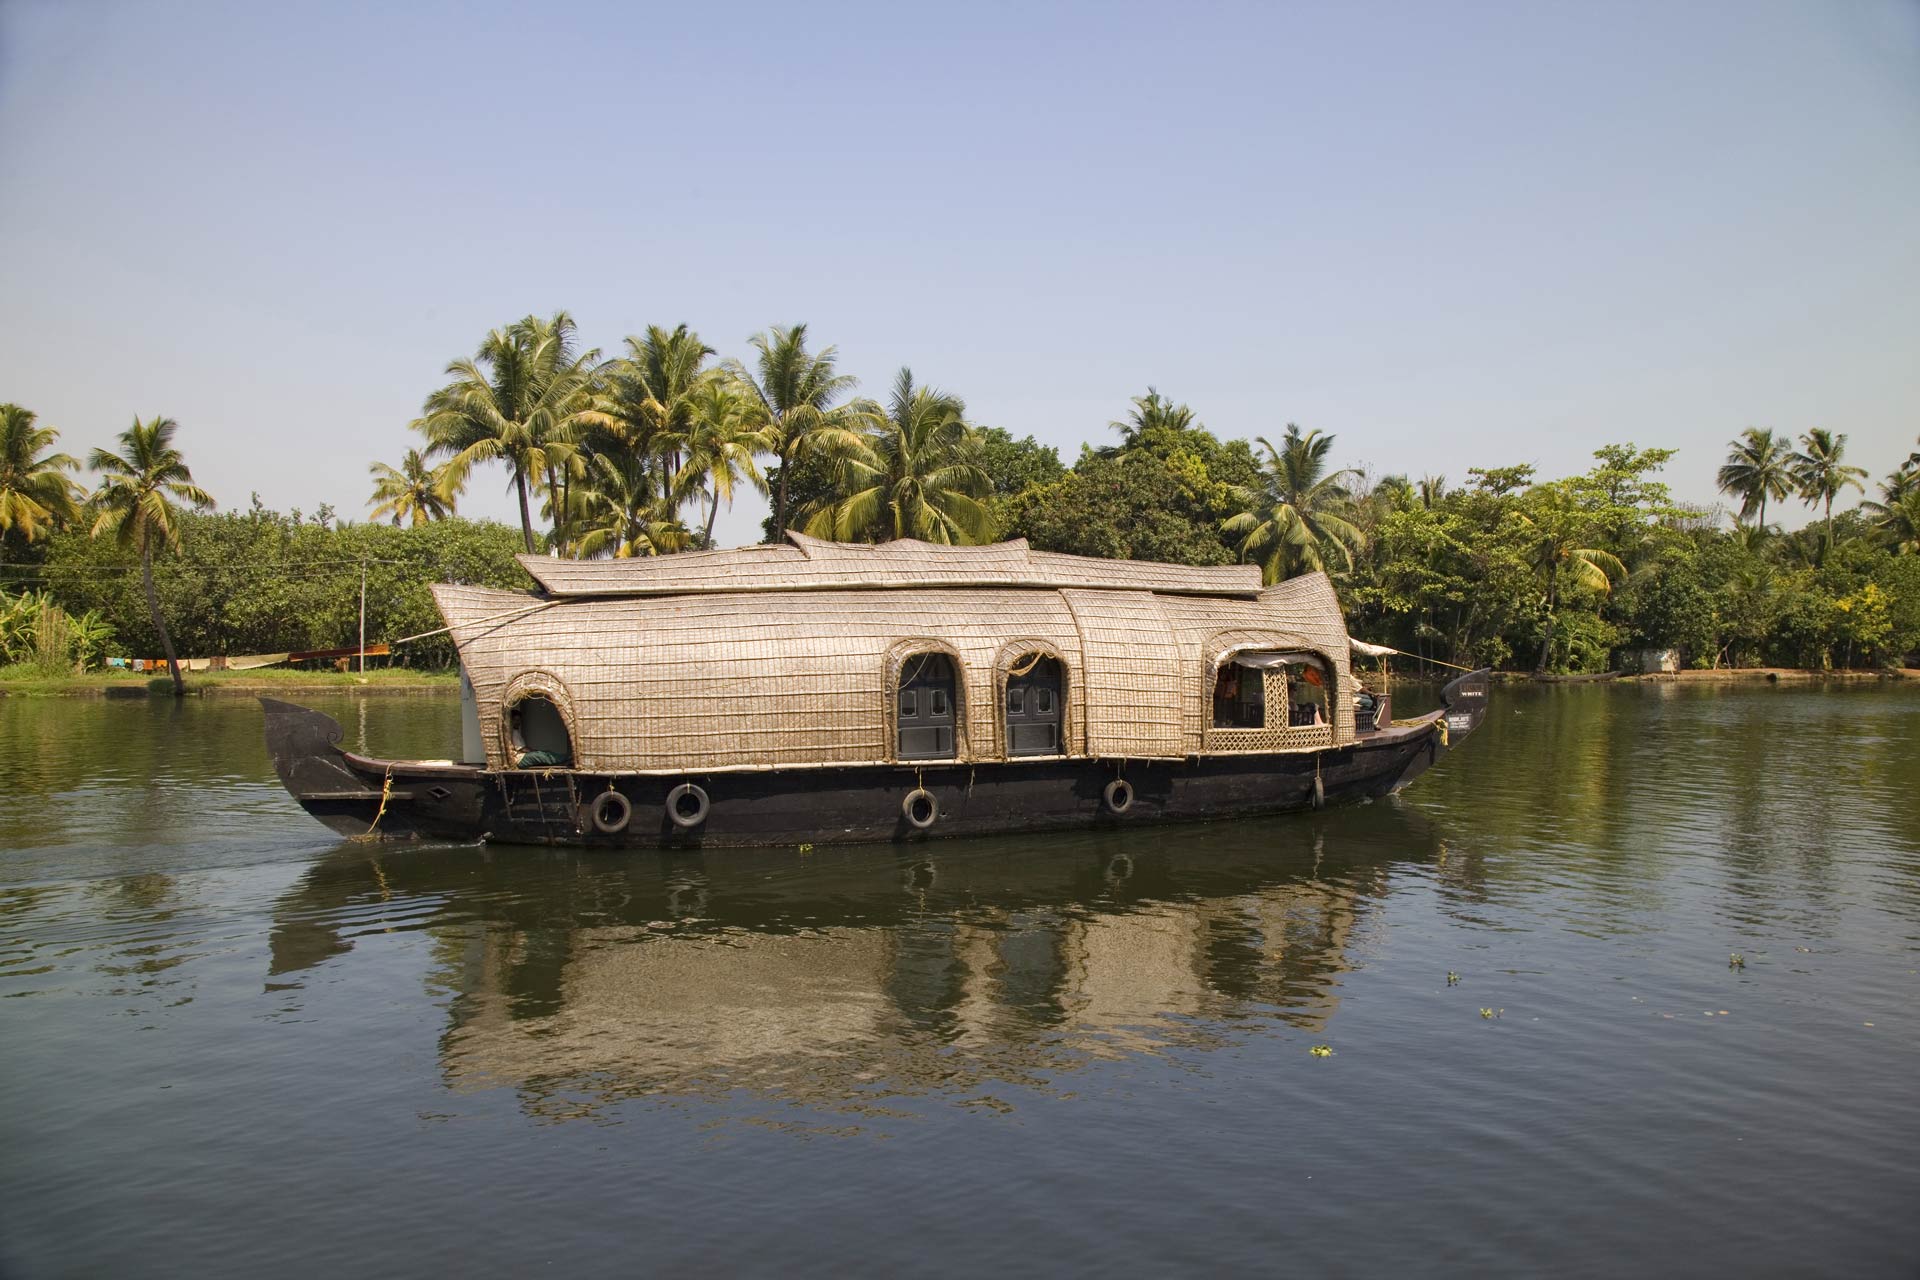 Traditional Indian houseboat near Alleppey on Kerala backwaters, India